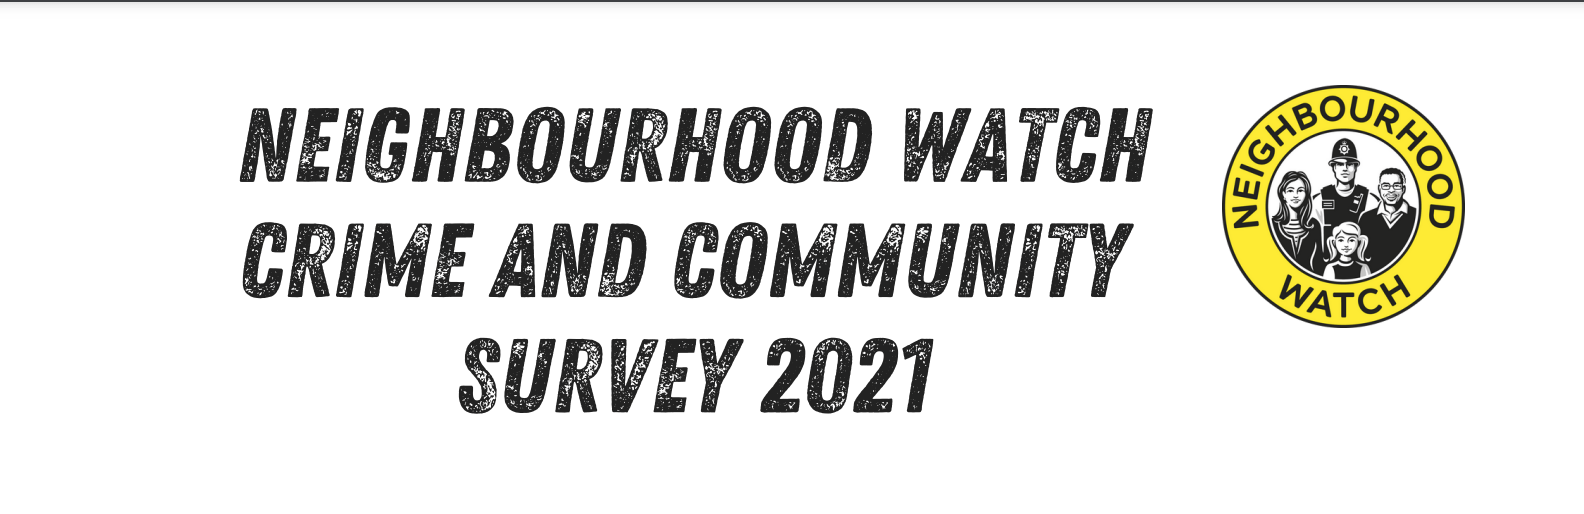 NEIGHBOURHOOD WATCH 2021 CRIME AND COMMUNITY SURVEY LAUNCHED ...